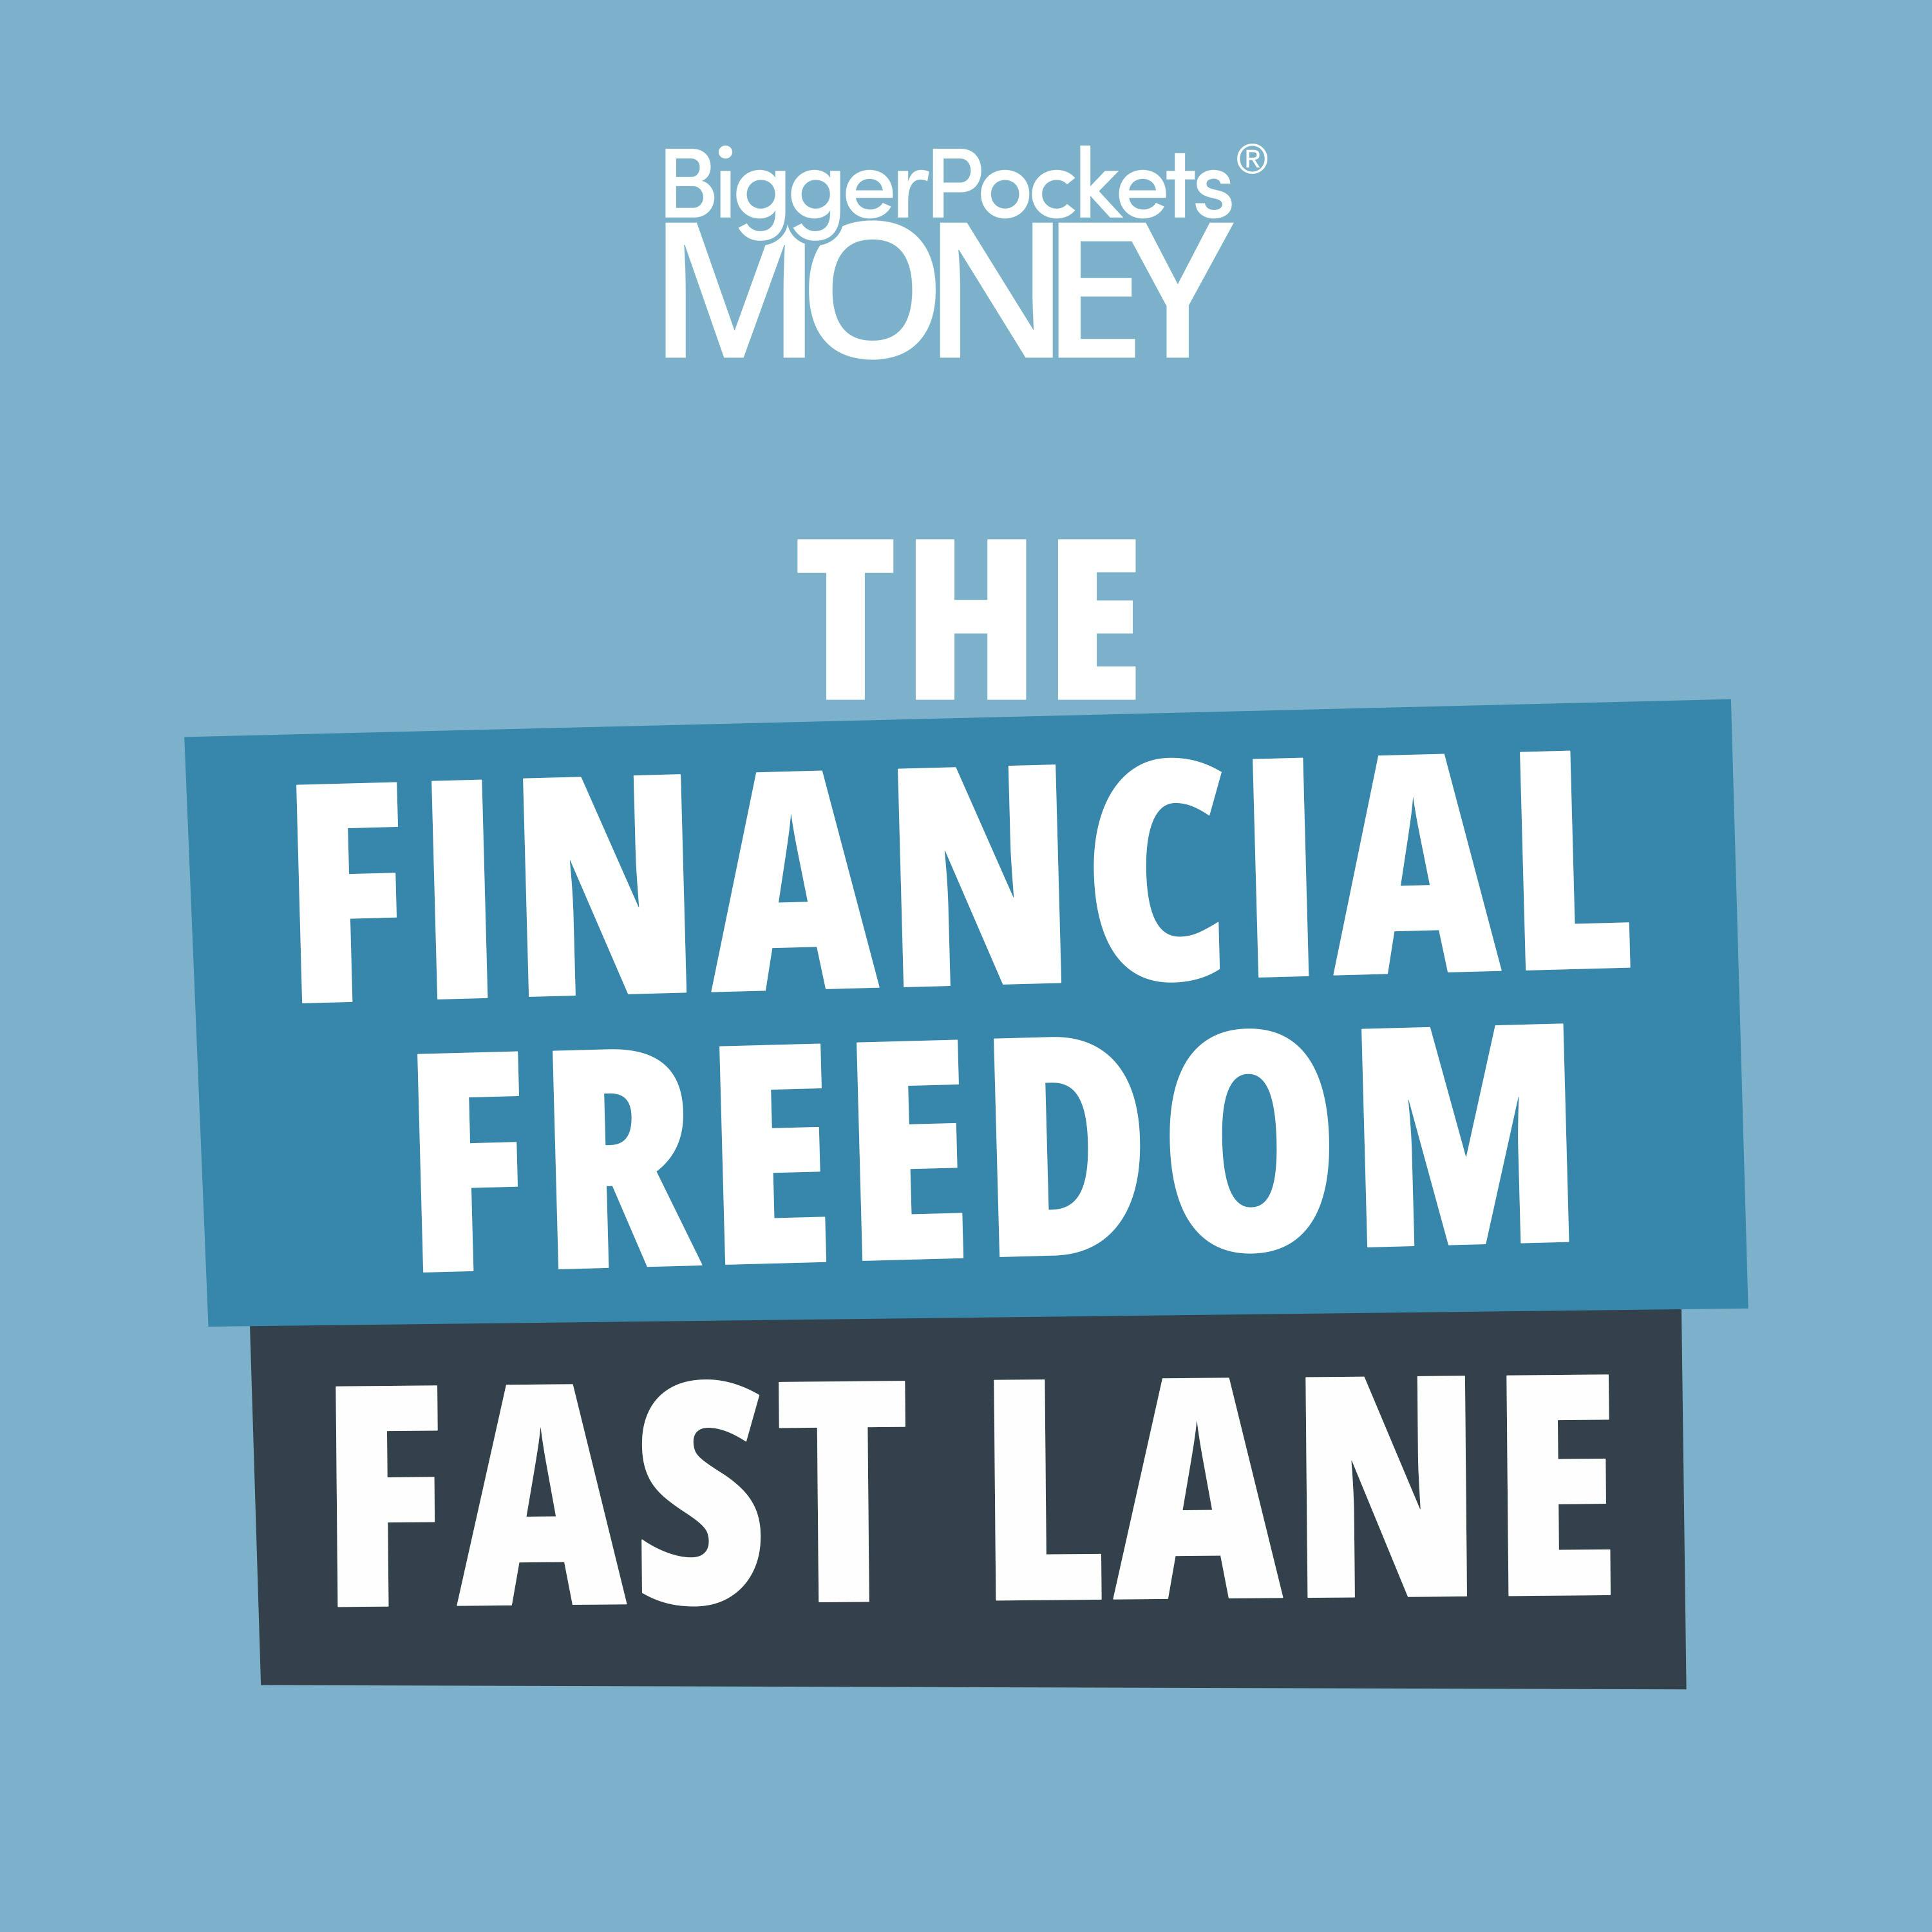 389: Finance Friday: How to DOUBLE Your Net Worth in 1 Year (or Less!)